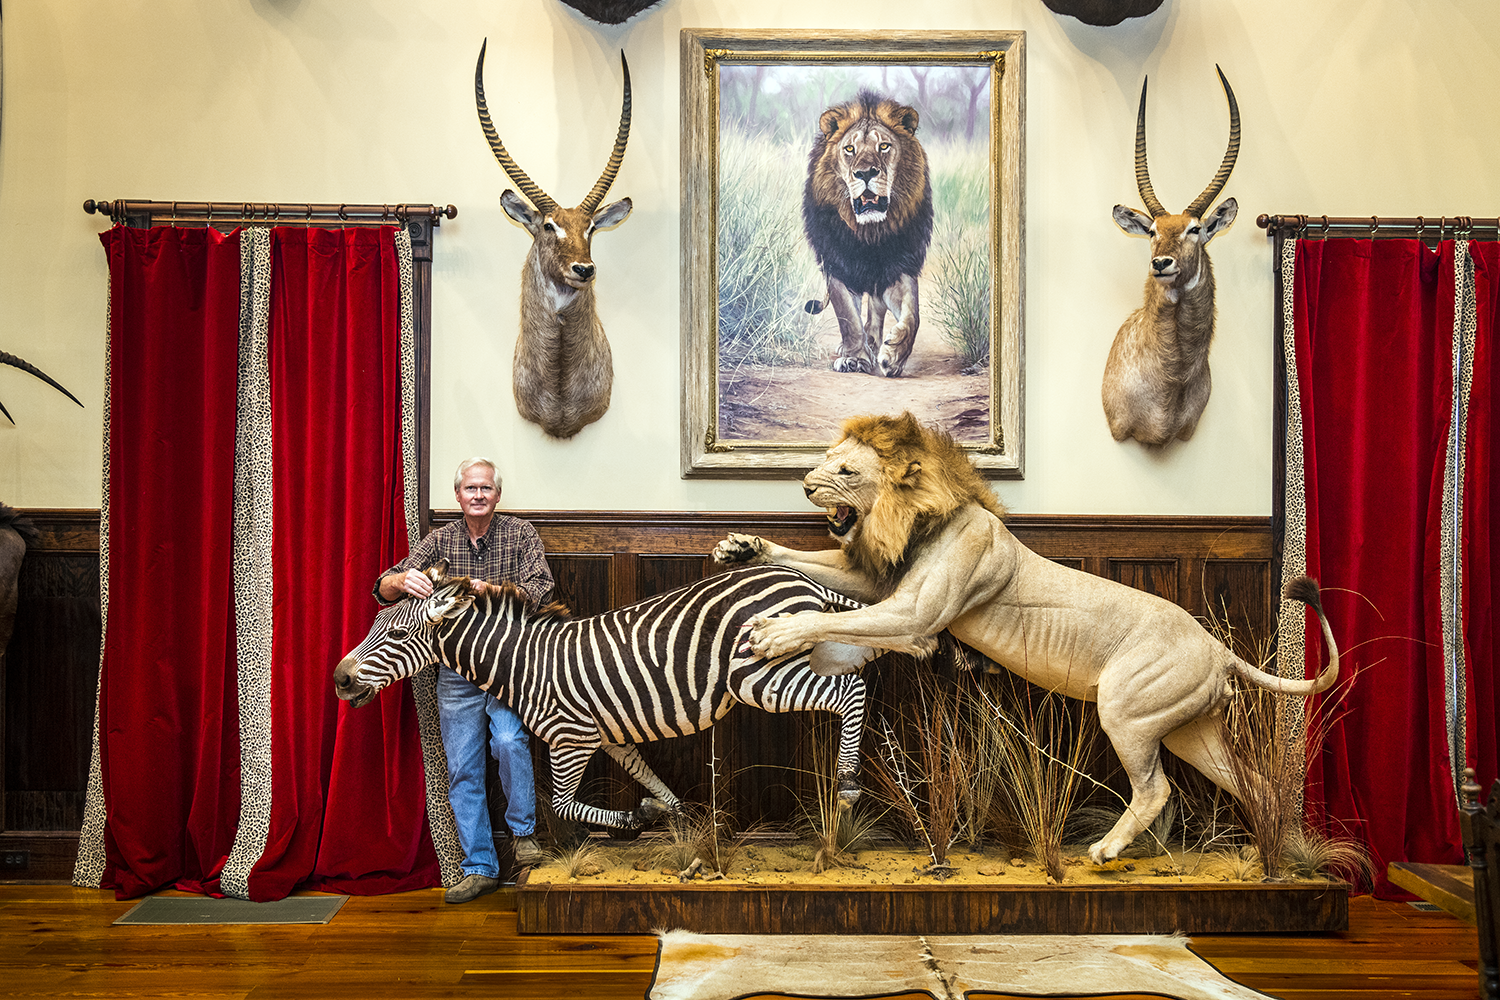 Man standing next to lion attacking zebra taxidermy mount.